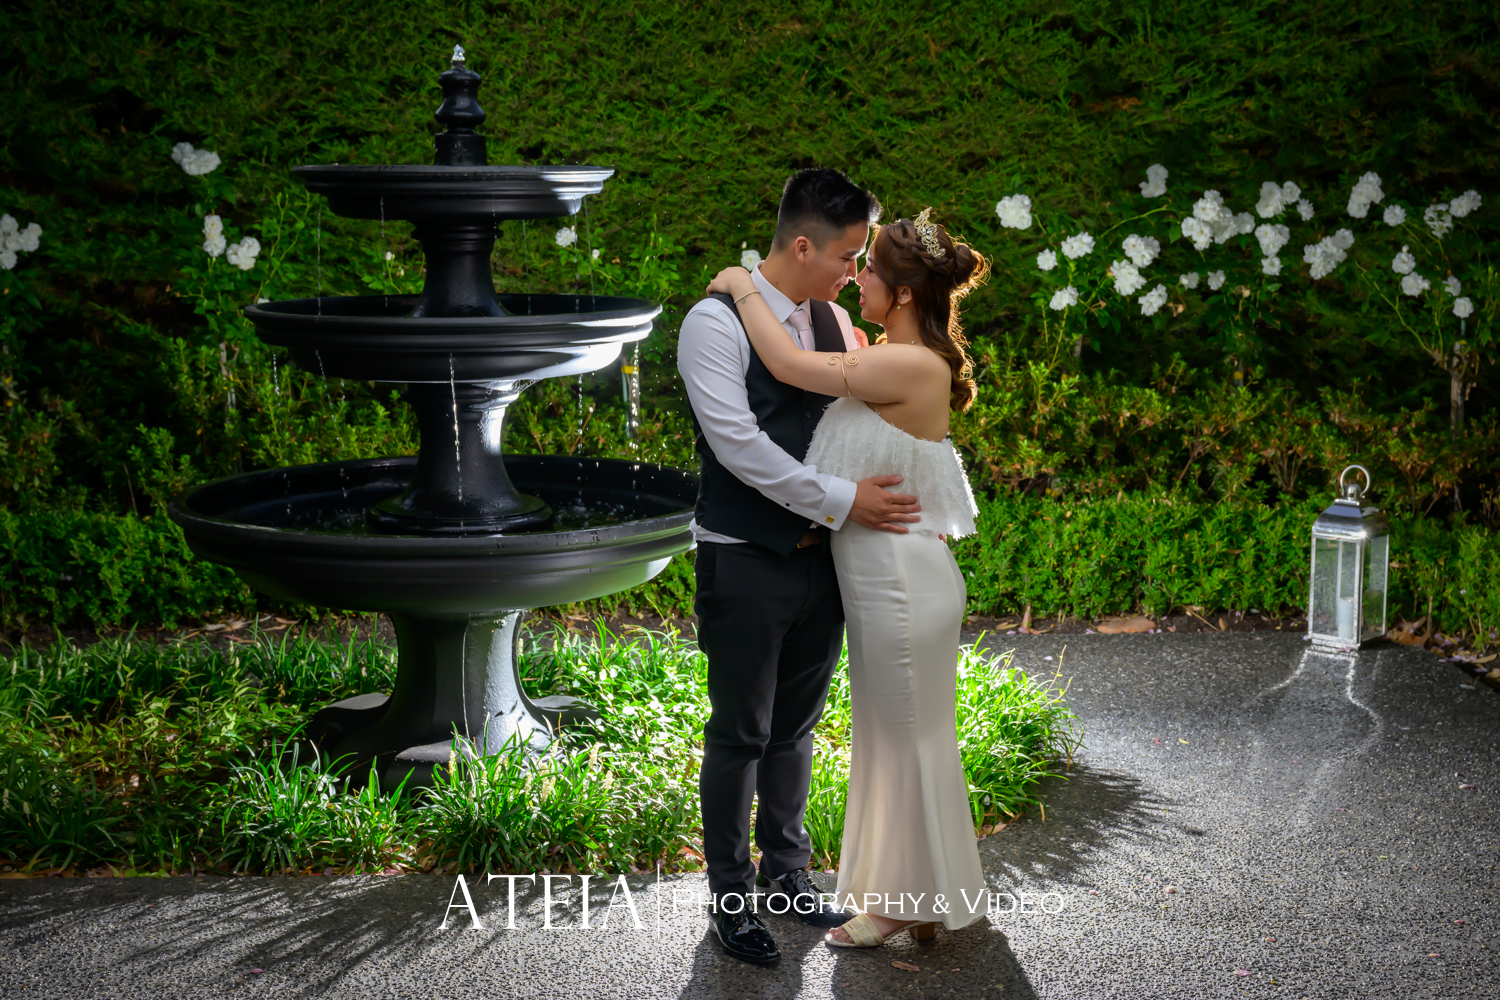 , Angelica and Khoa&#8217;s wedding photography at Vogue Ballroom captured by ATEIA Photography &#038; Video